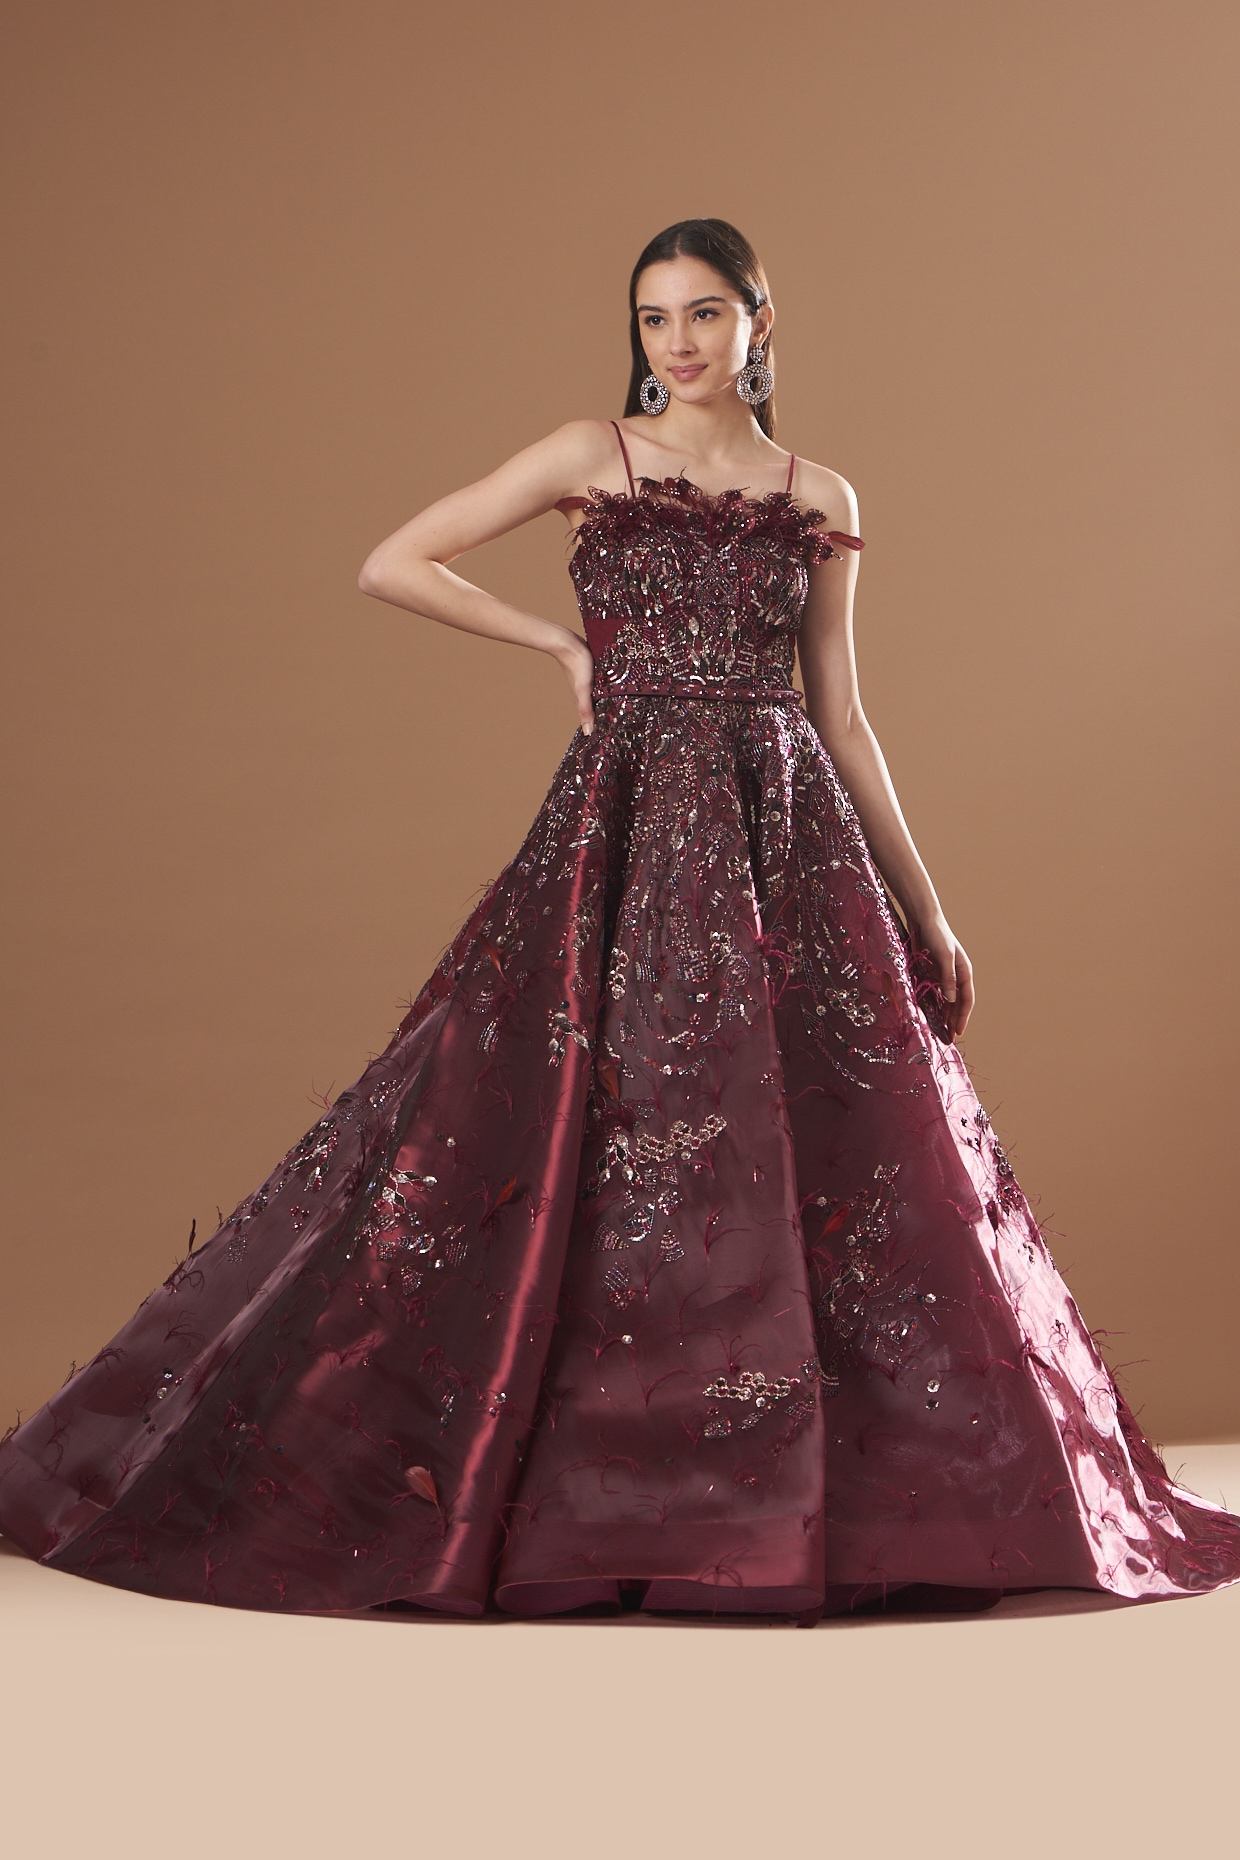 Appealing Function Wear Georgette Fabric Gown In Maroon Color